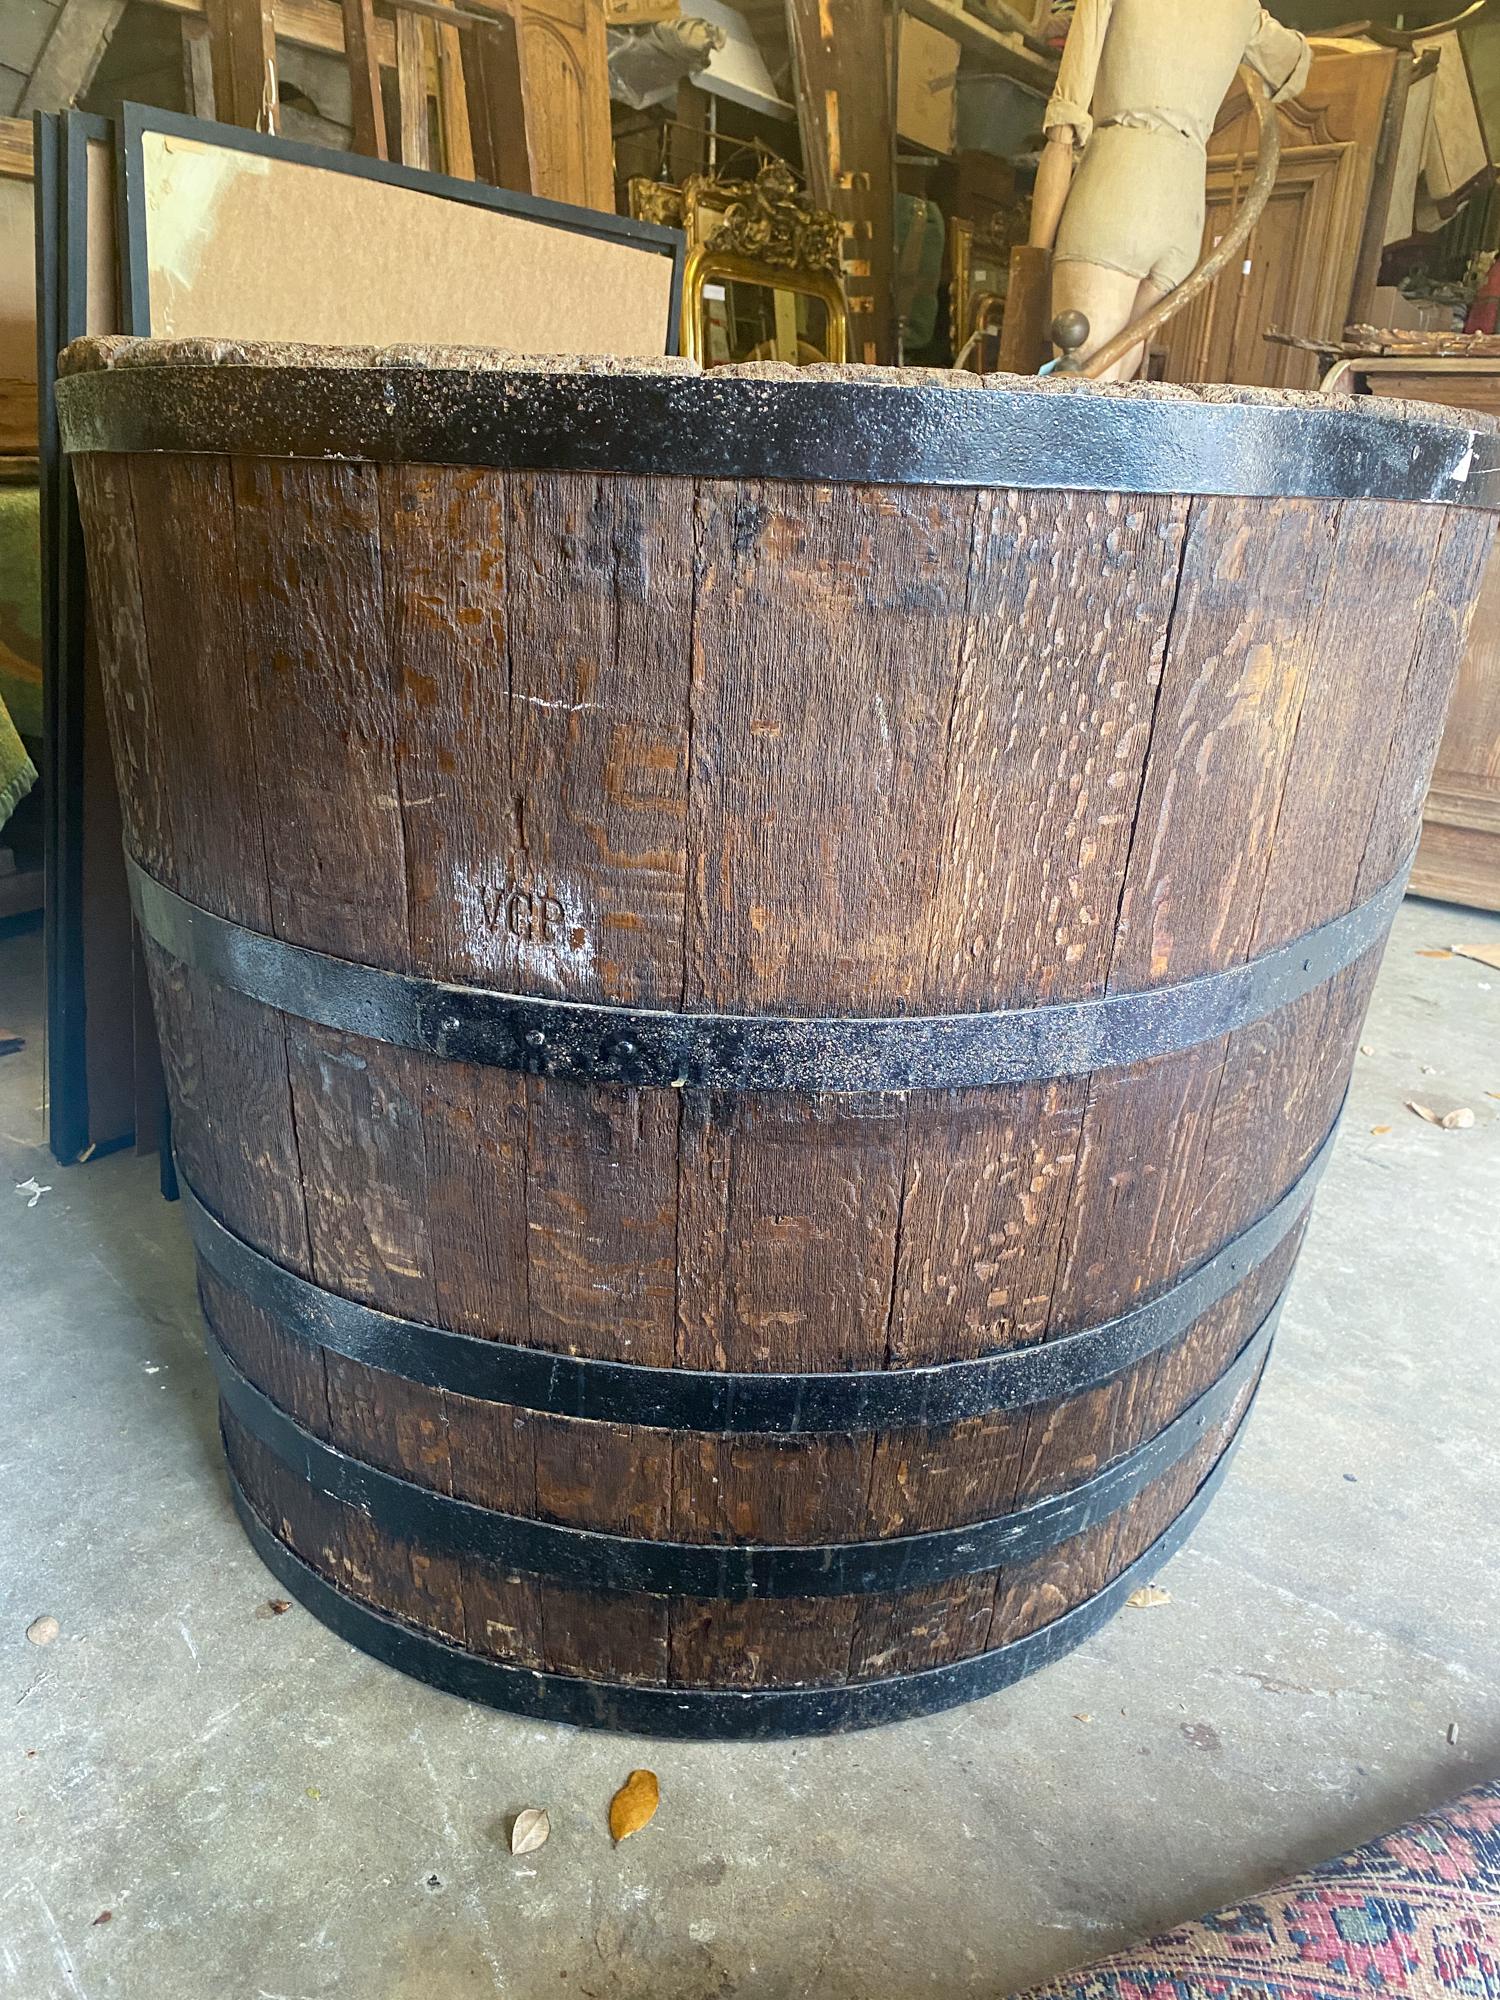 Sourced in the heart of the Champagne region of France near Reims, this enormous oak barrel originated from the famous house of Veuve Clicquot Ponsardin, and is stamped 